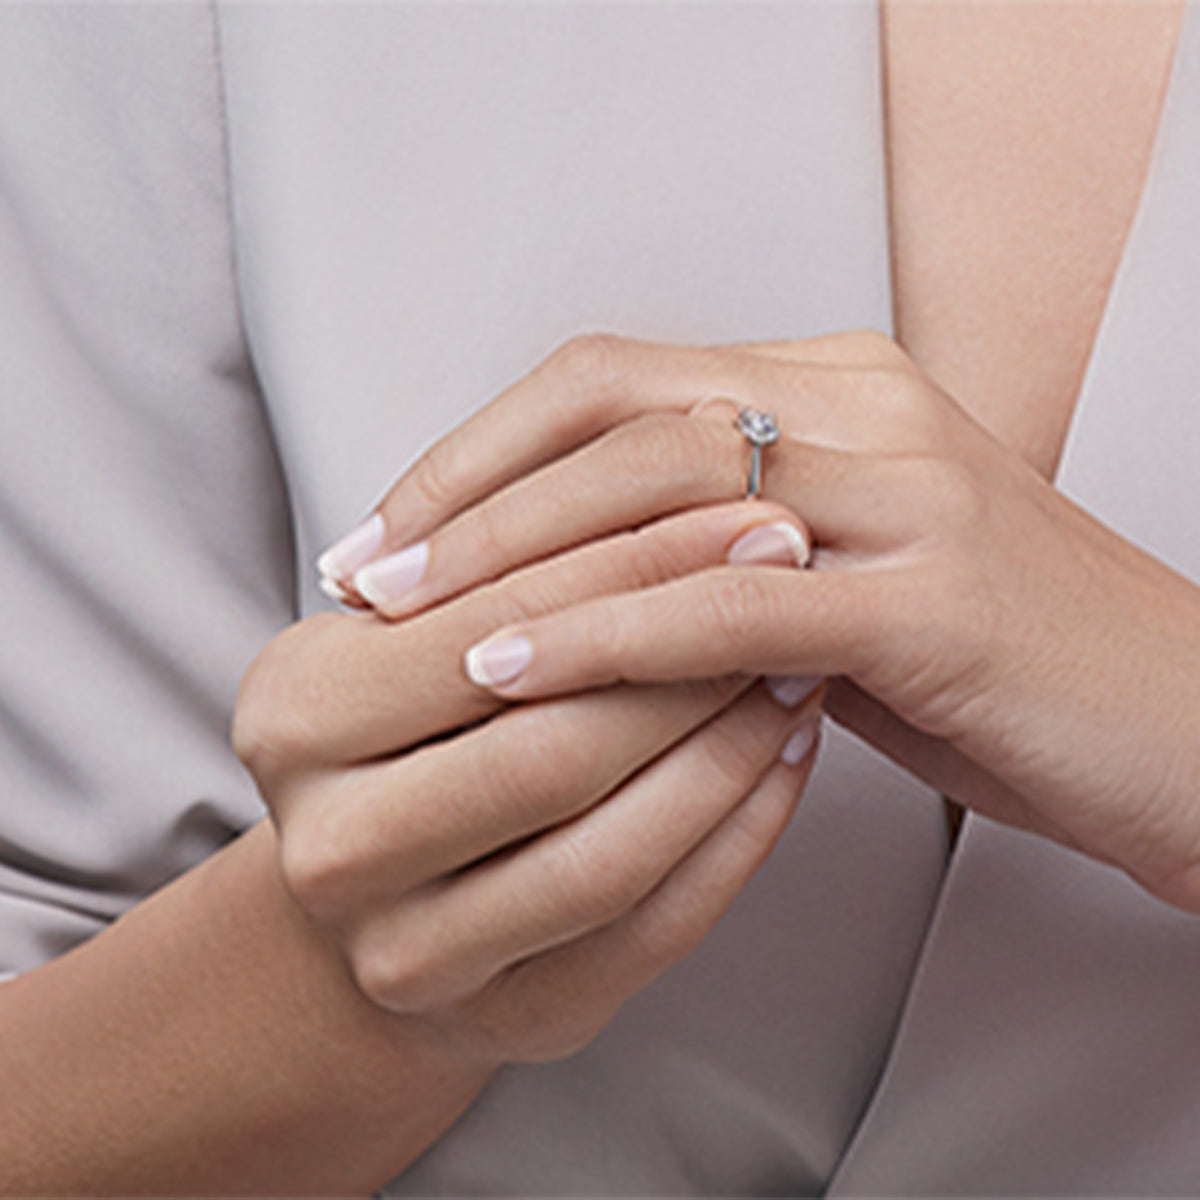 Woman putting on a Shimansky ring on her wedding finger